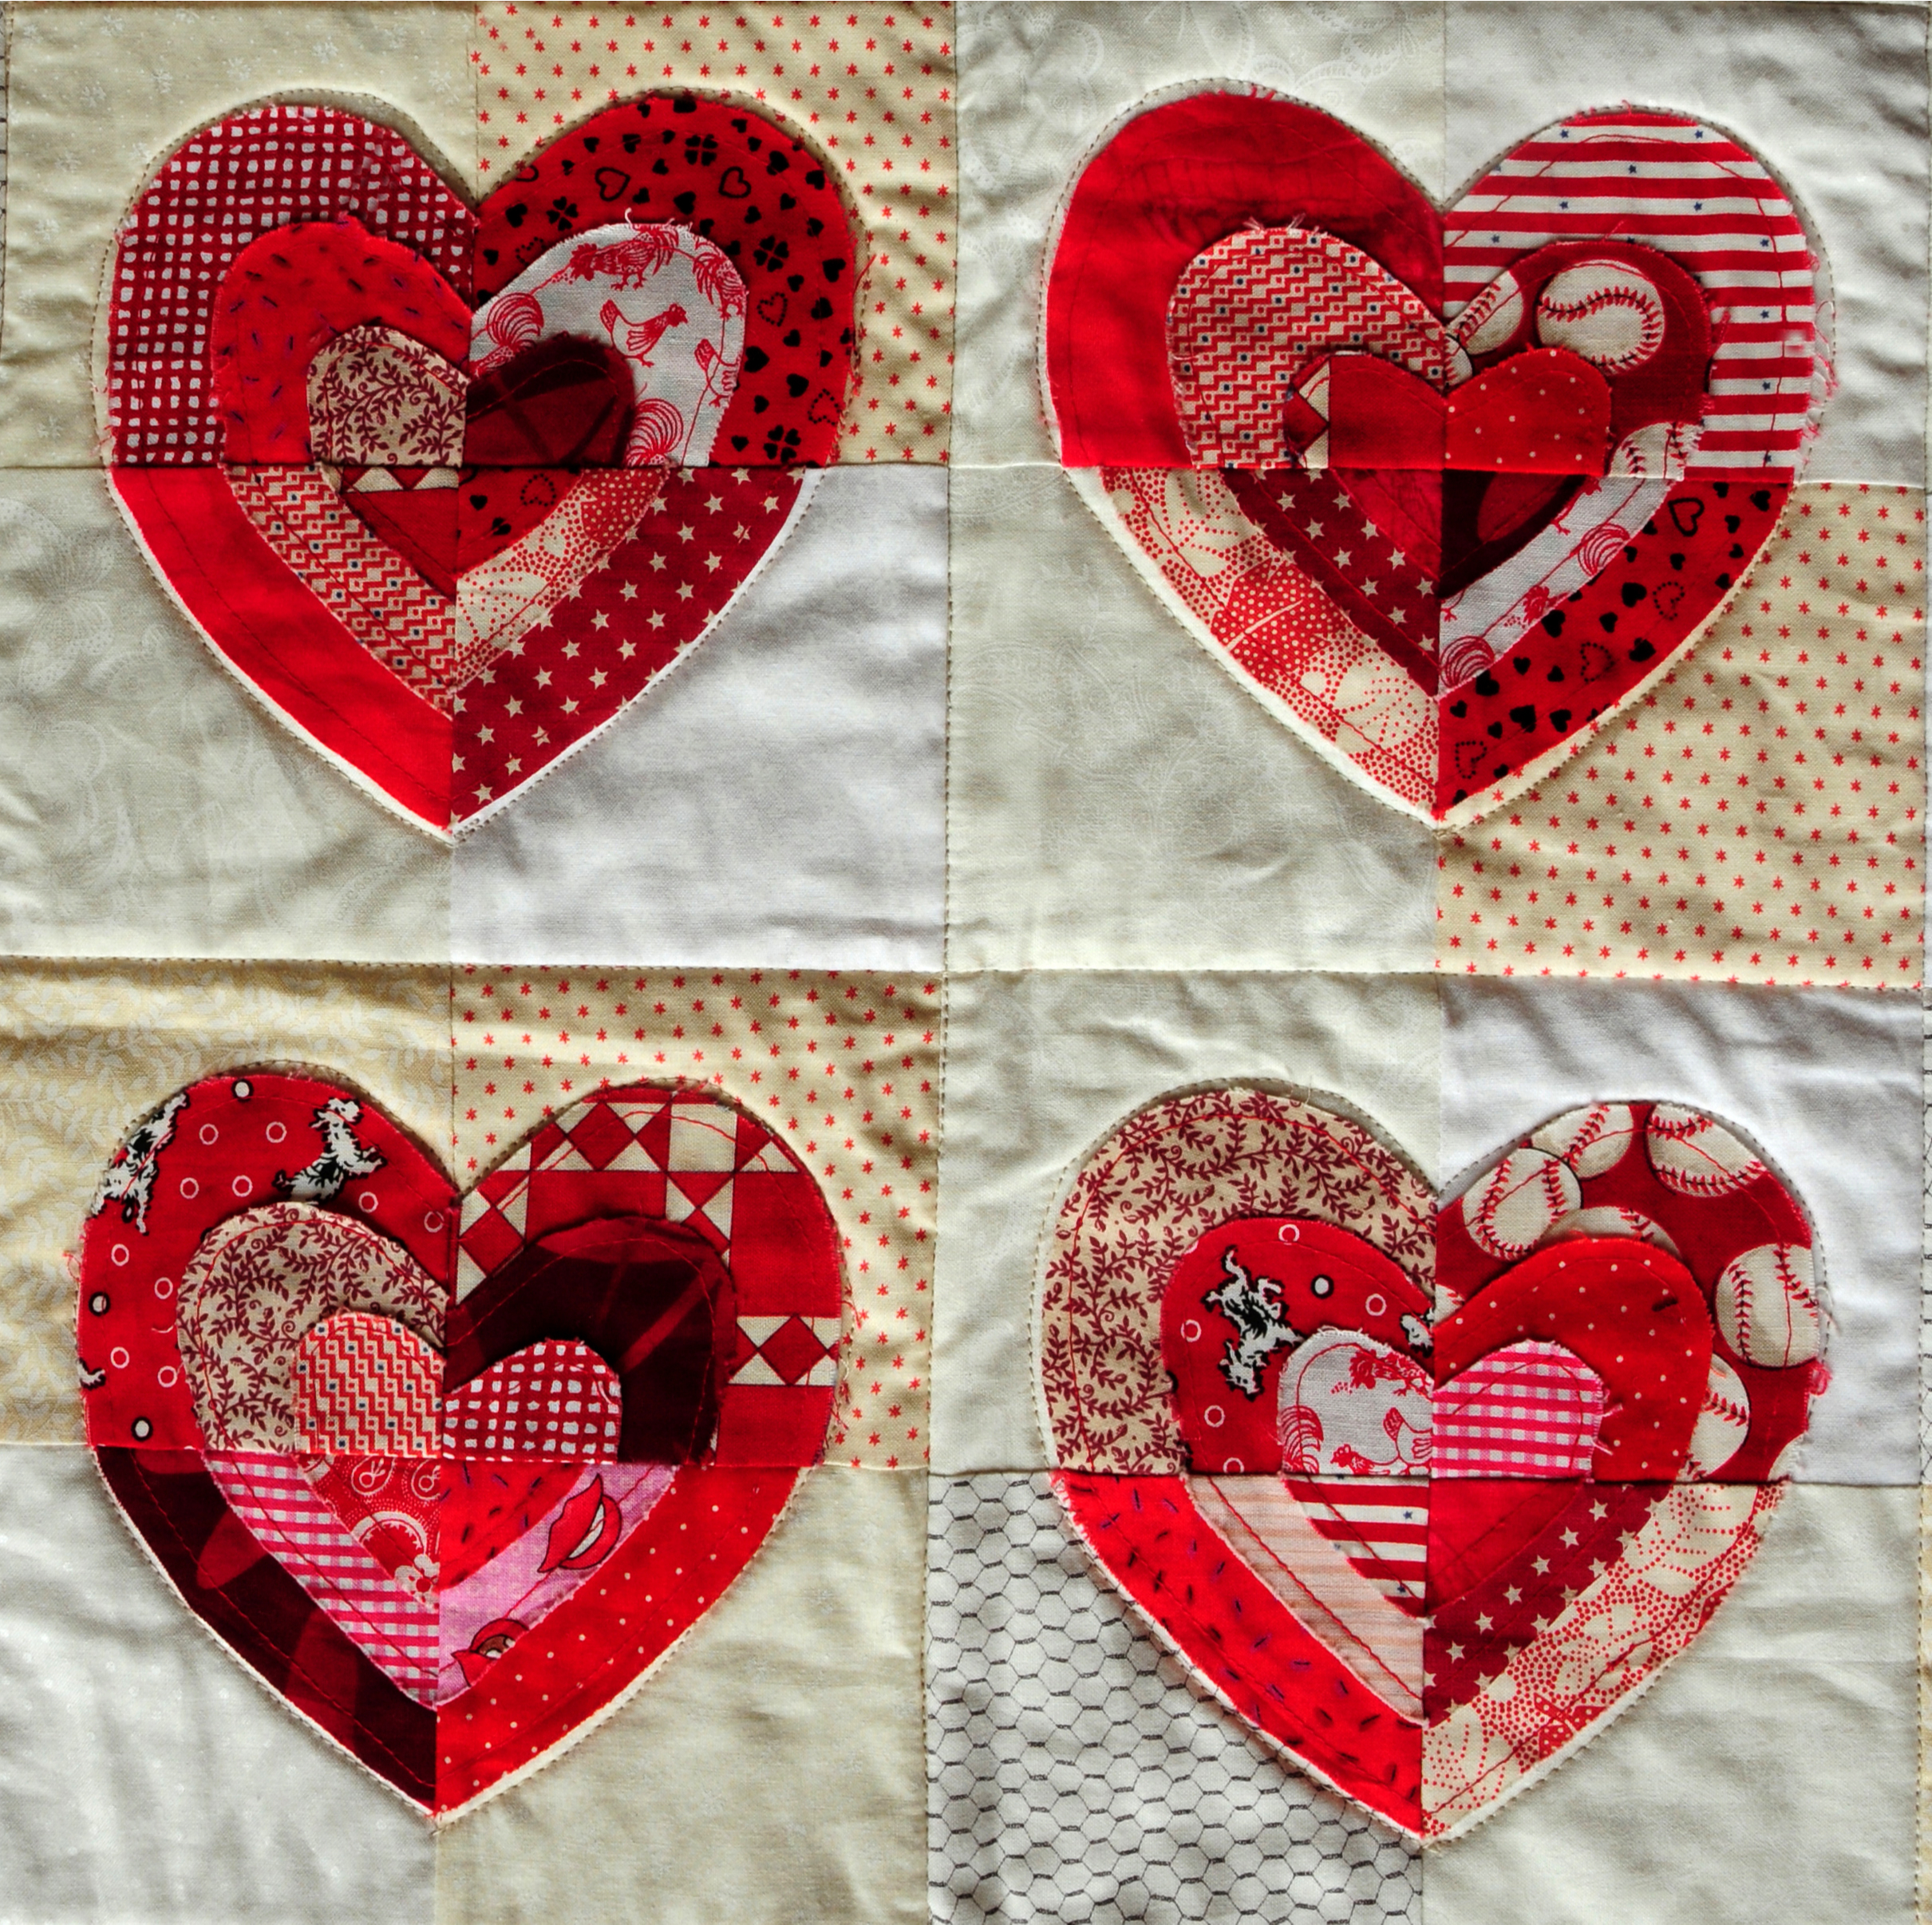 Is there anything better than creating your own home decor? These Valentine's sewing projects will having you falling in love with them. Try sewing your own quit. 